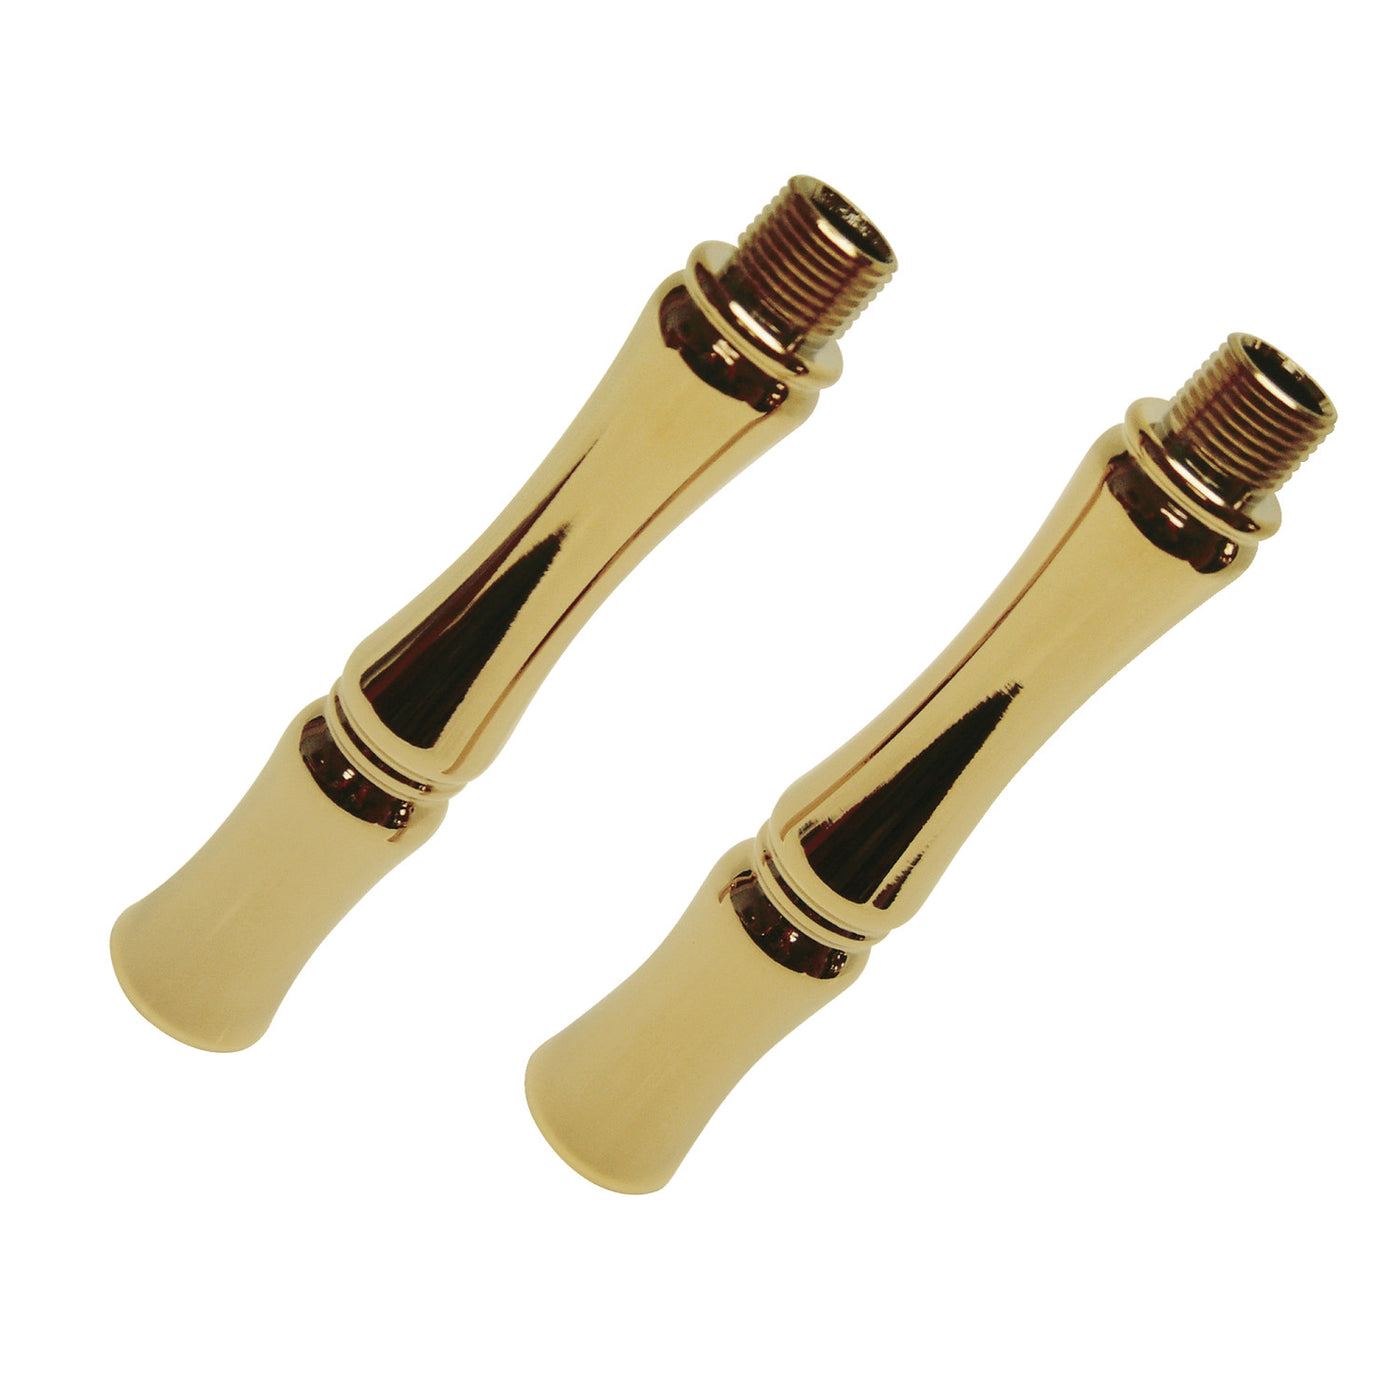 Elements of Design DS452EXT 7-Inch Extension Kit for CC452 Series, Polished Brass